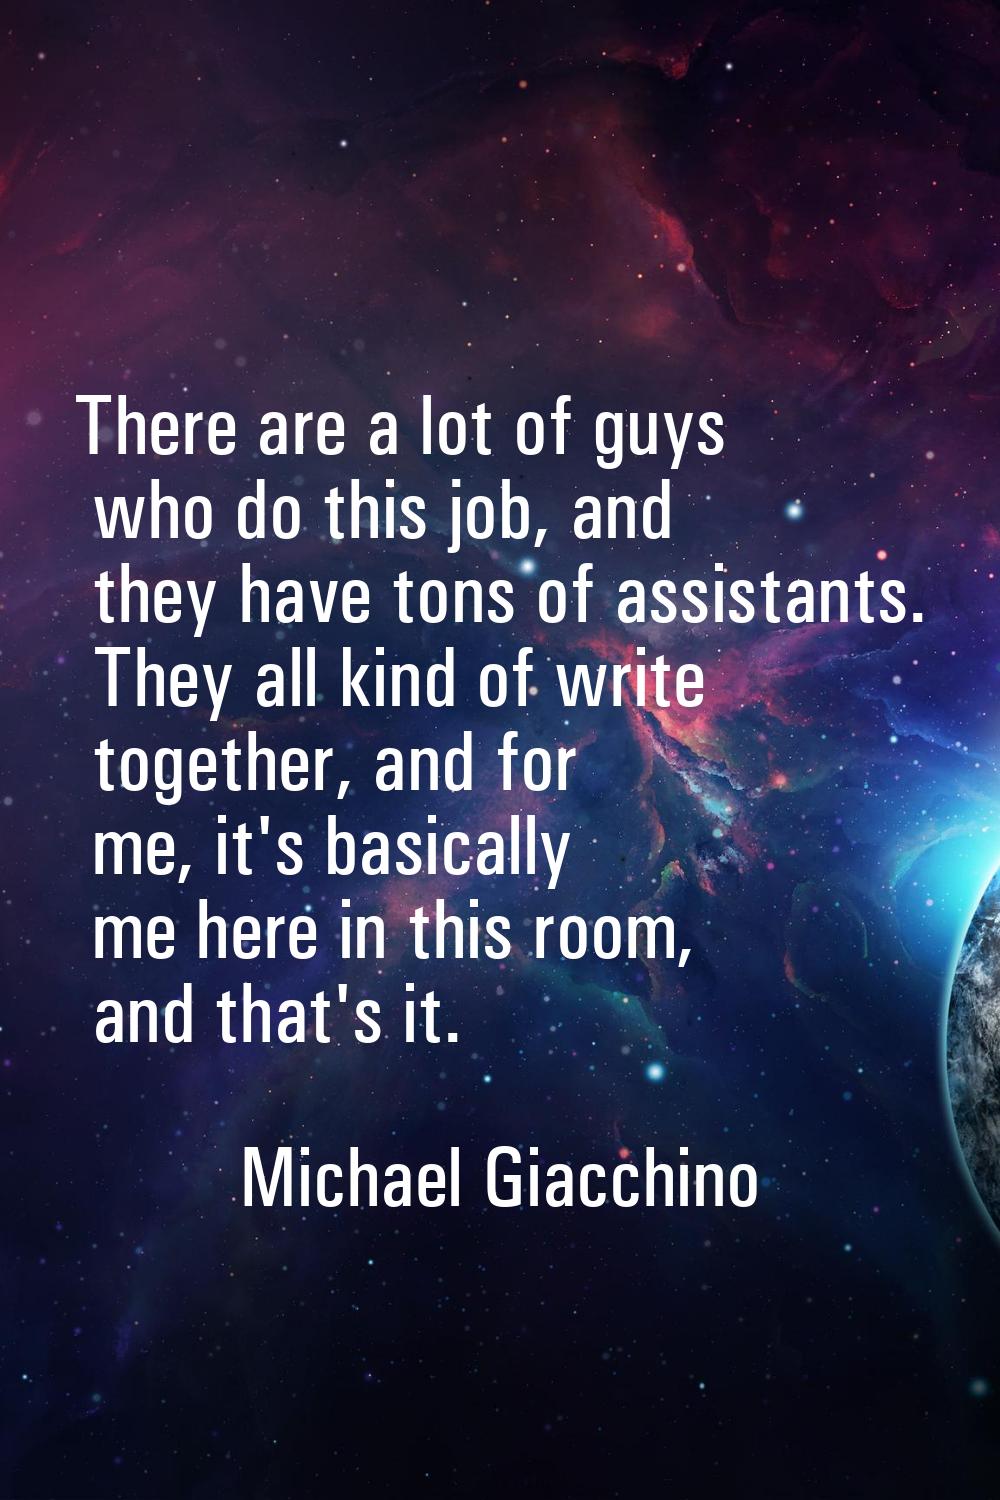 There are a lot of guys who do this job, and they have tons of assistants. They all kind of write t